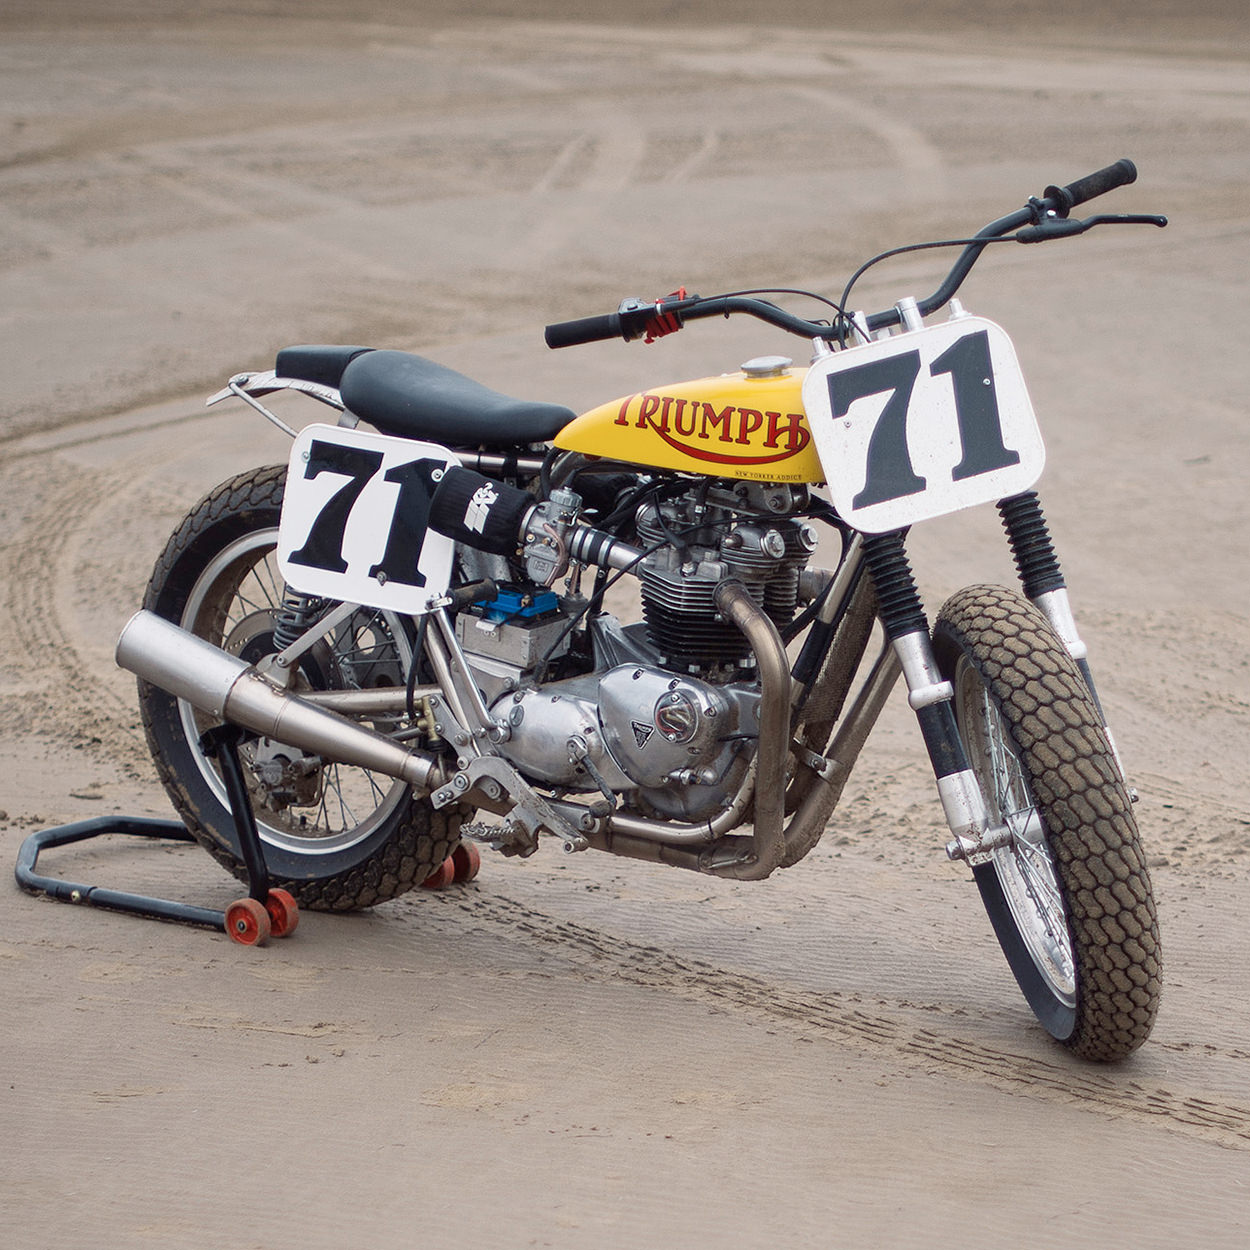 Triumph TR6 flat tracker by Christophe Canitrot 